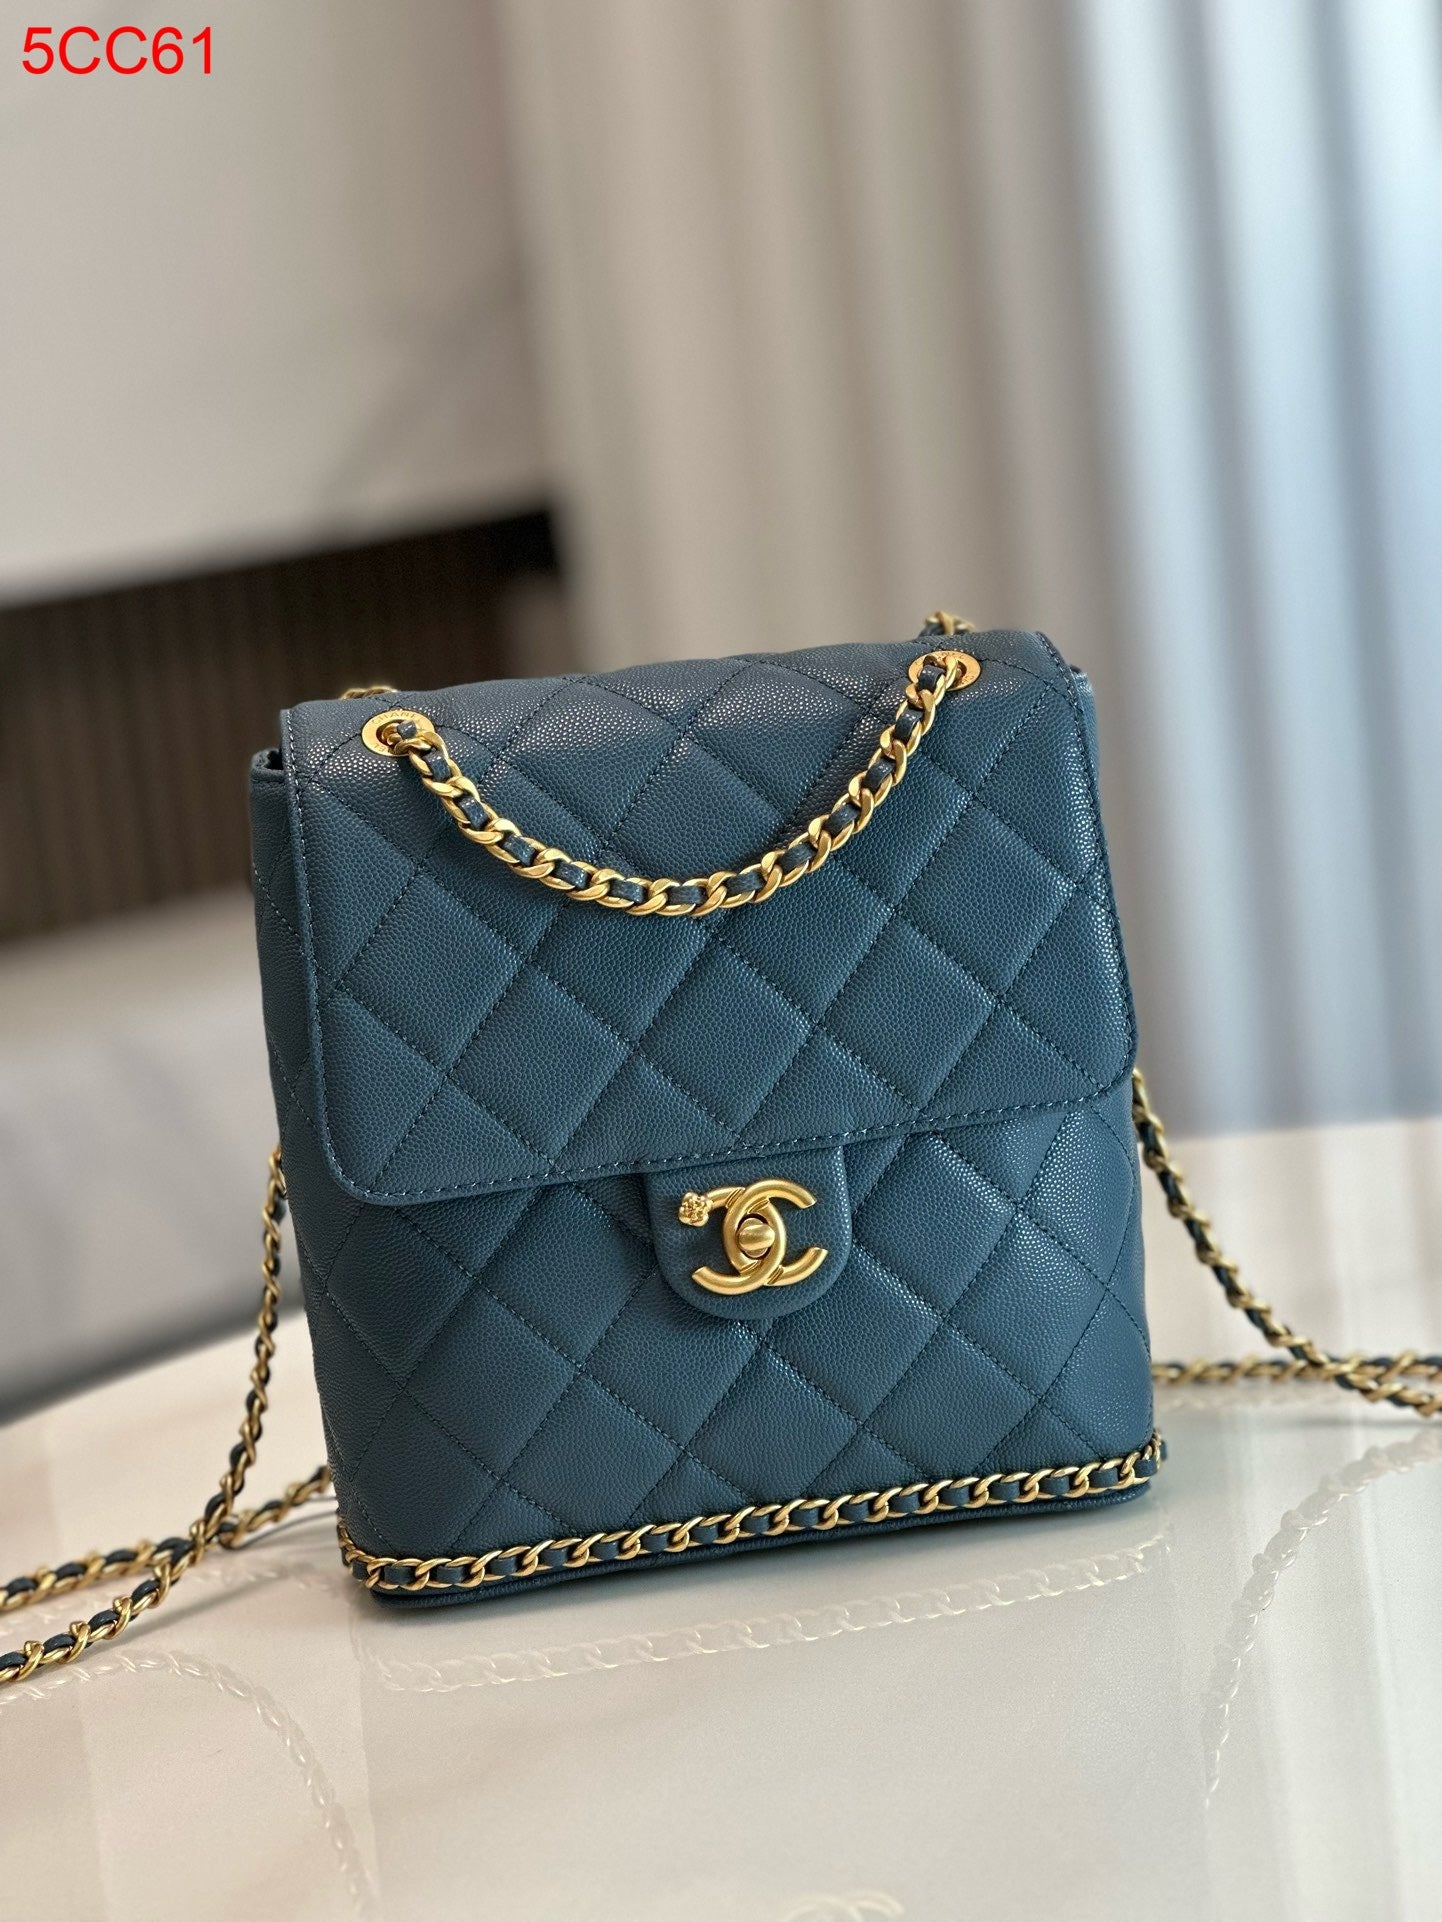 Chanel Flap Backpack